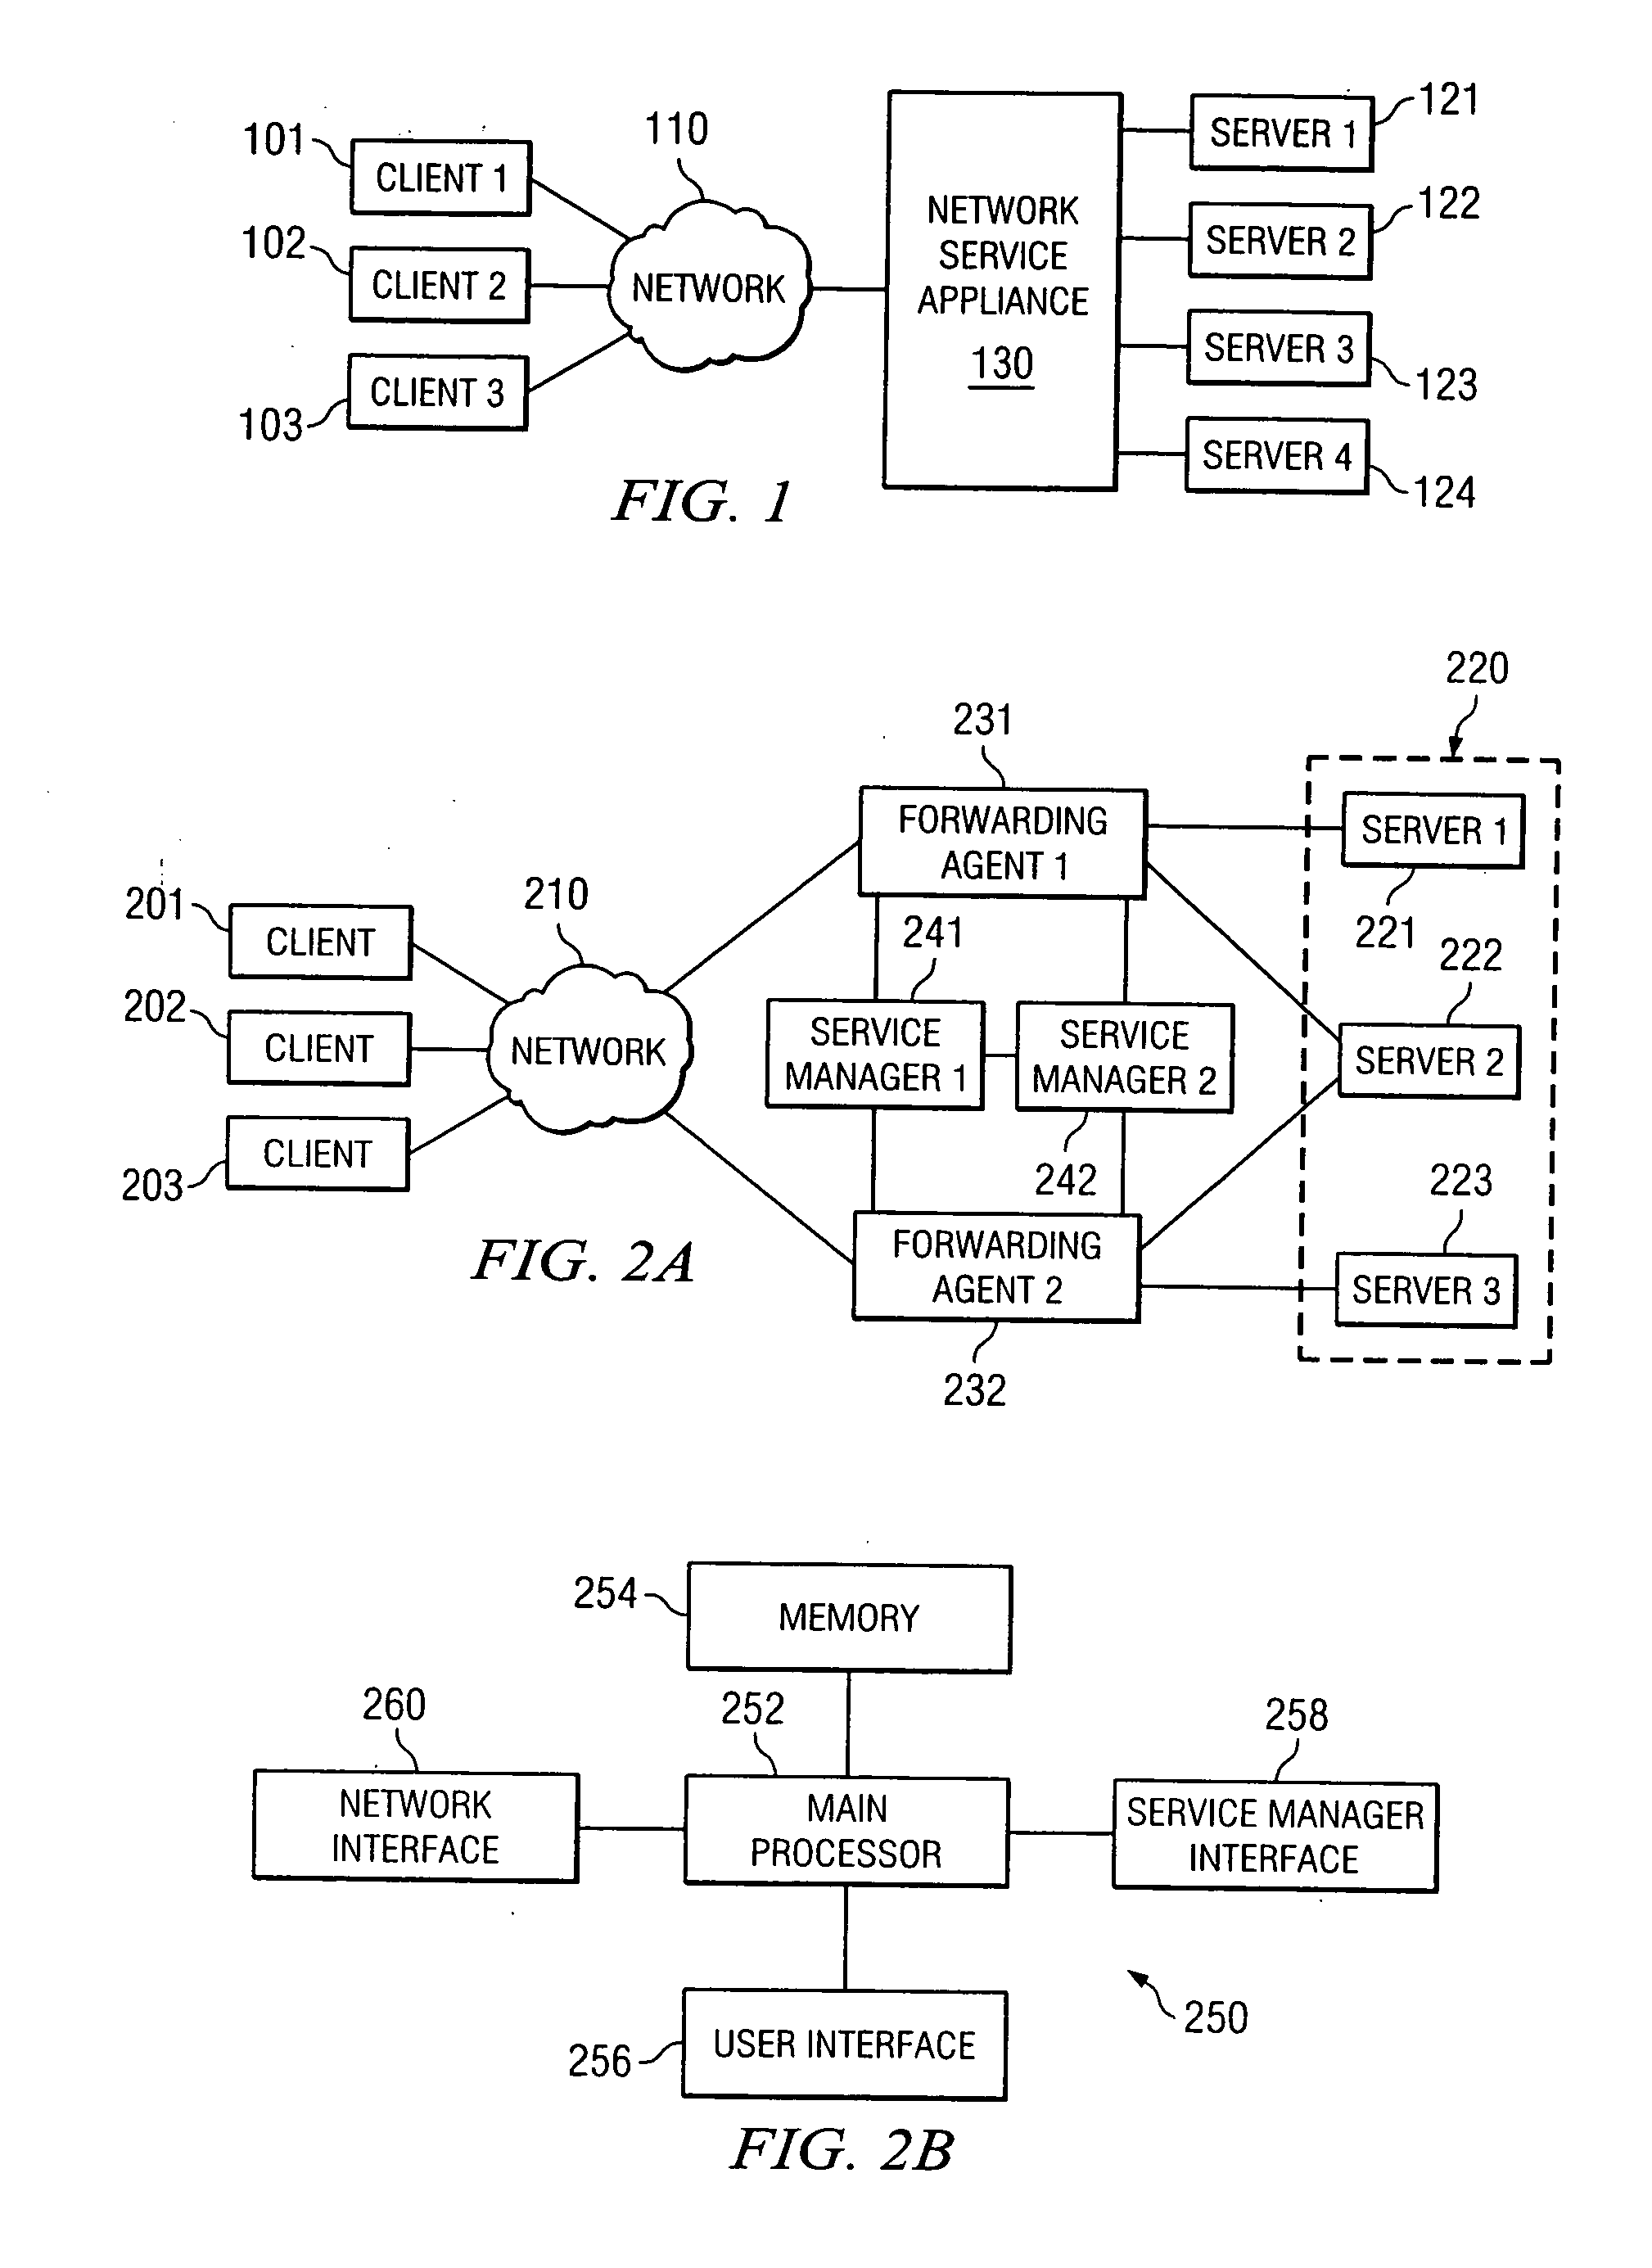 Load balancing using distributed forwarding agents with application based feedback for different virtual machines